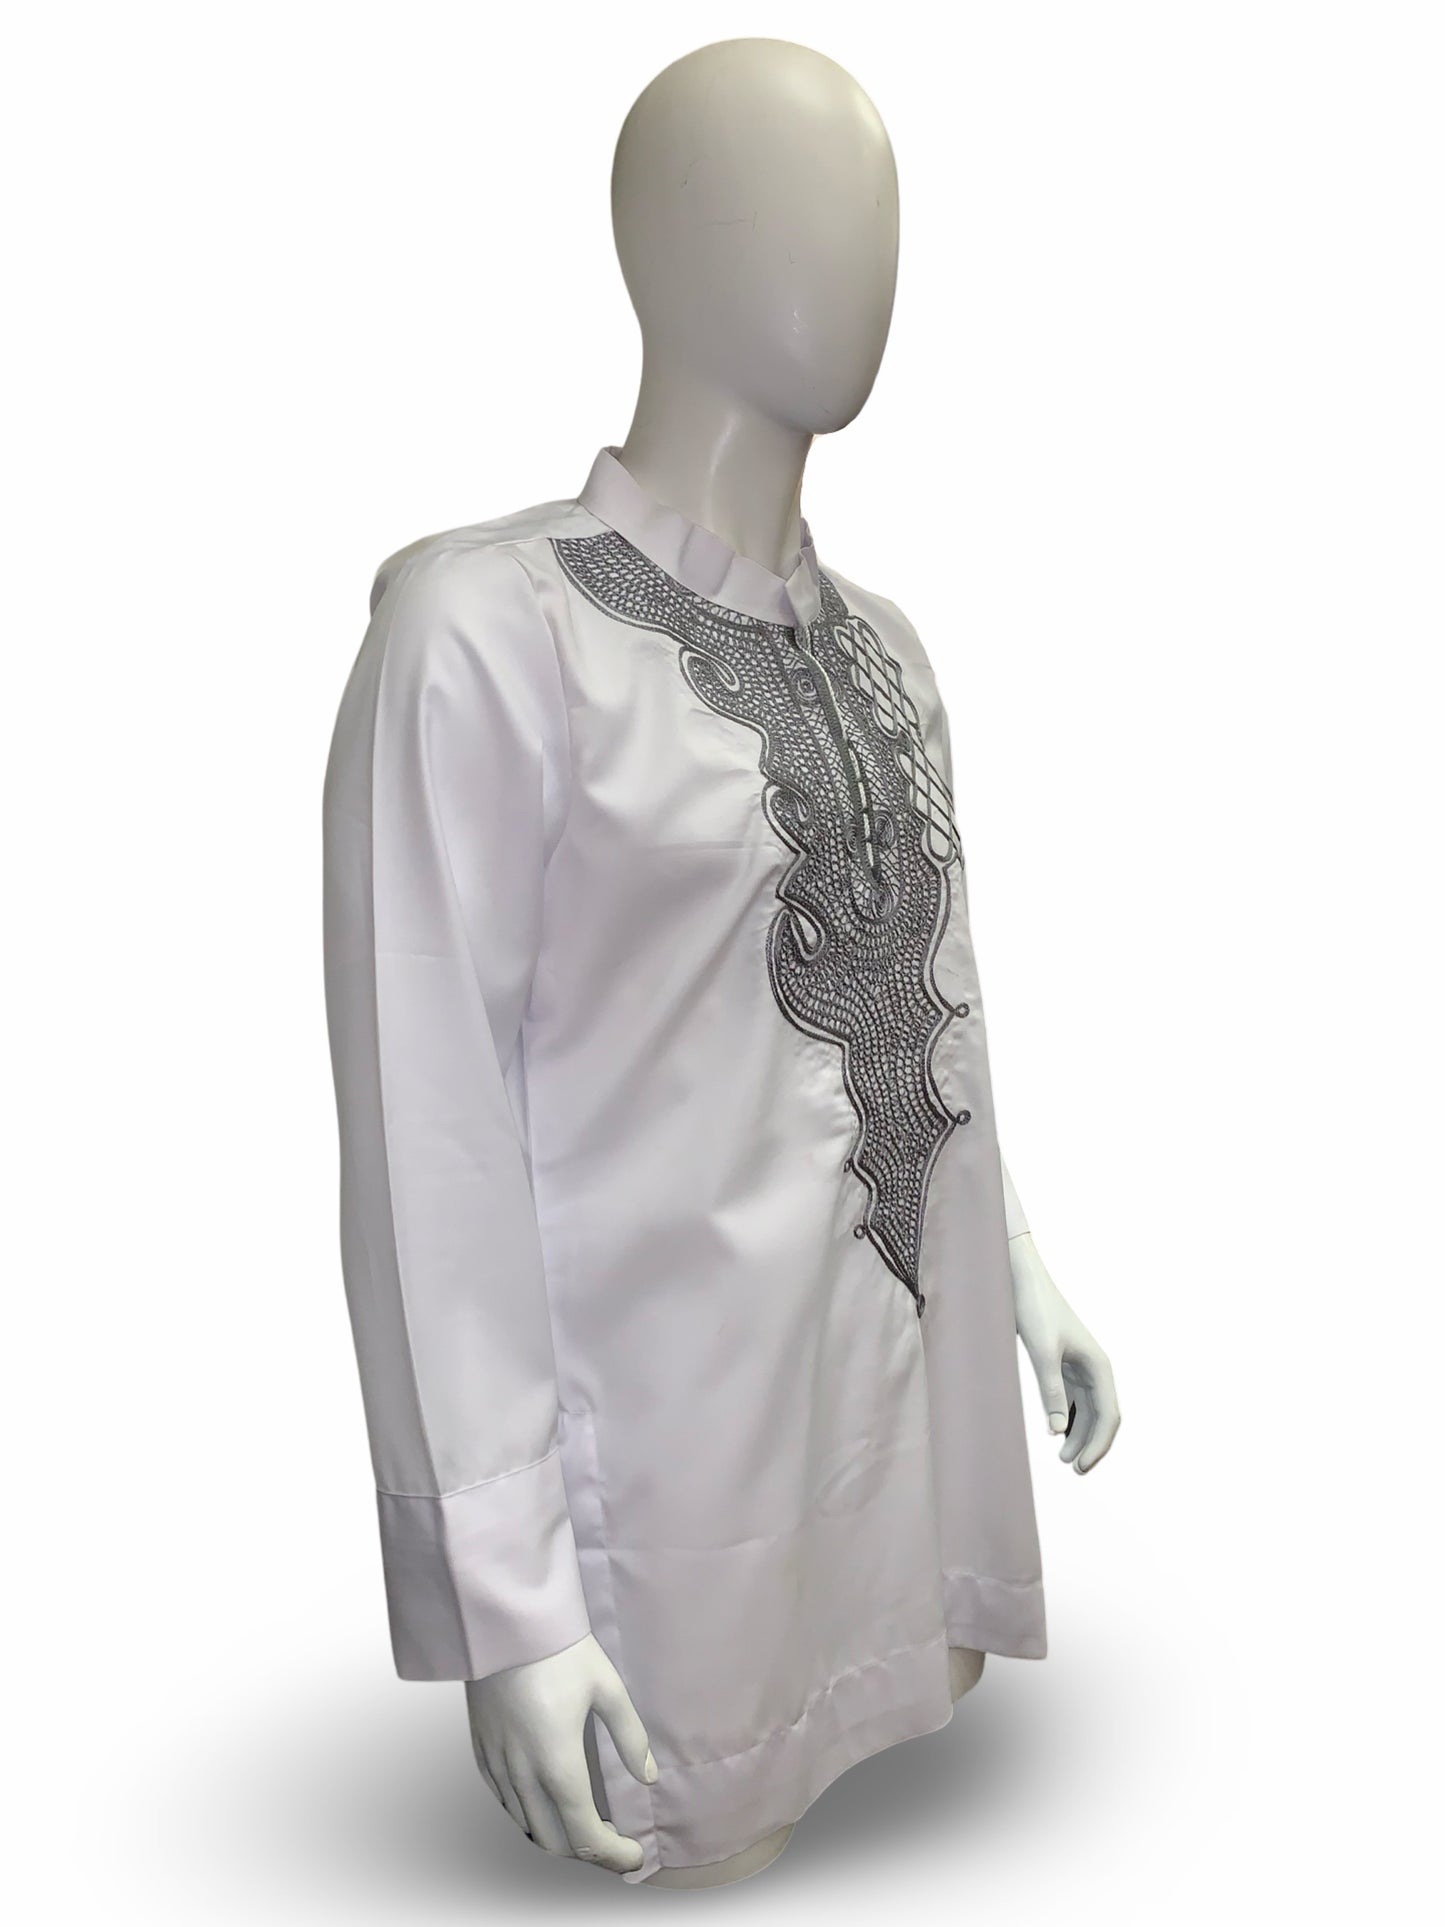 Men’s Embroidery Shirt (White & Silver)